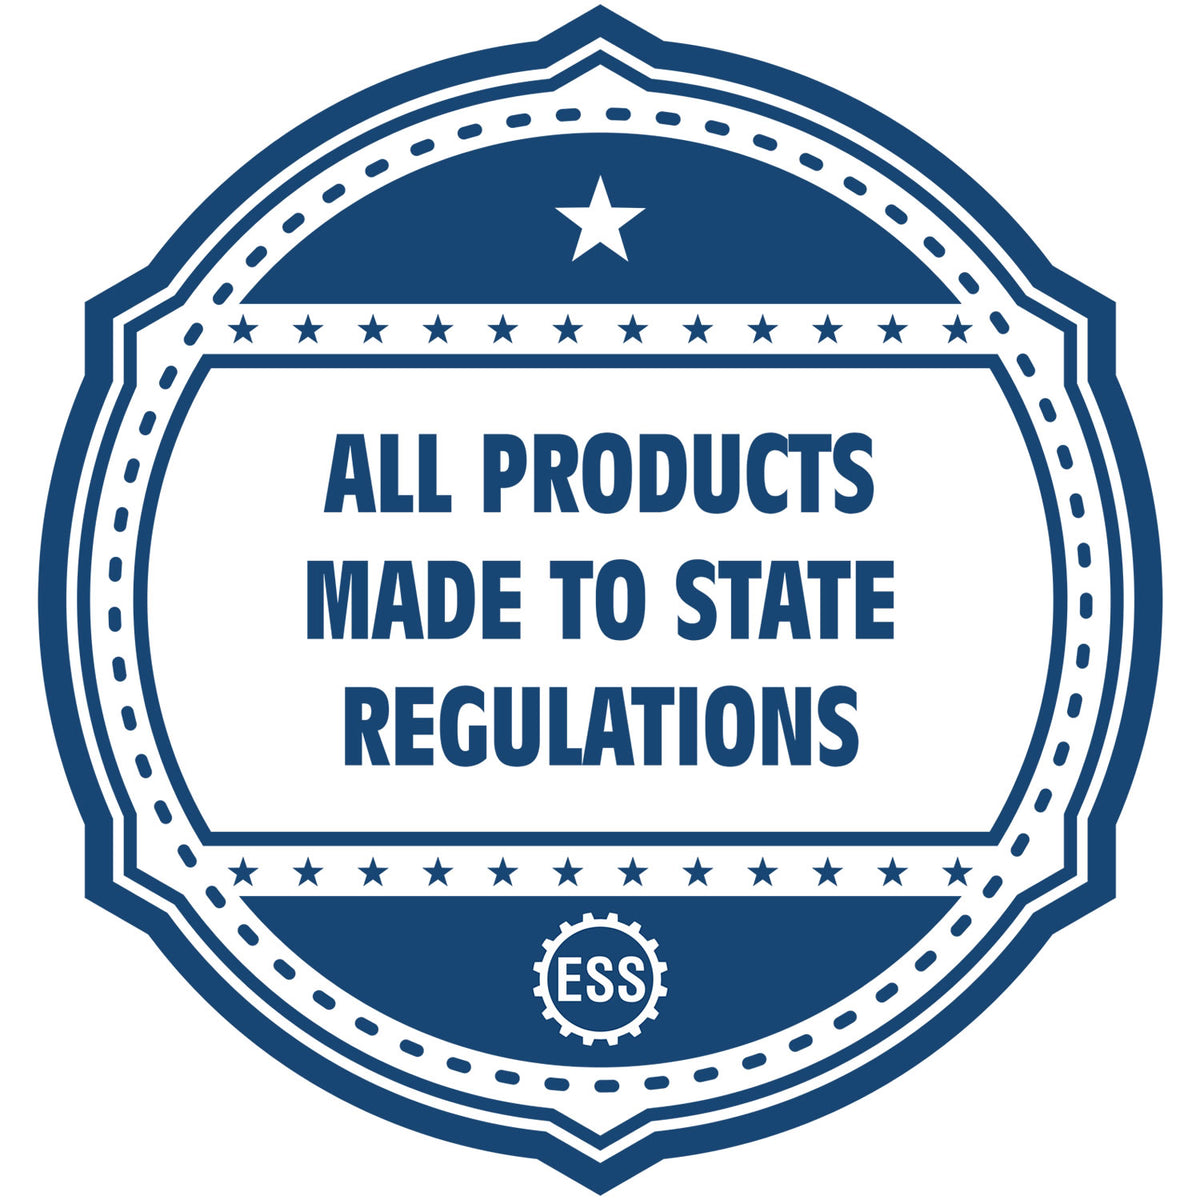 An icon or badge element for the Heavy Duty Cast Iron Maryland Land Surveyor Seal Embosser showing that this product is made in compliance with state regulations.